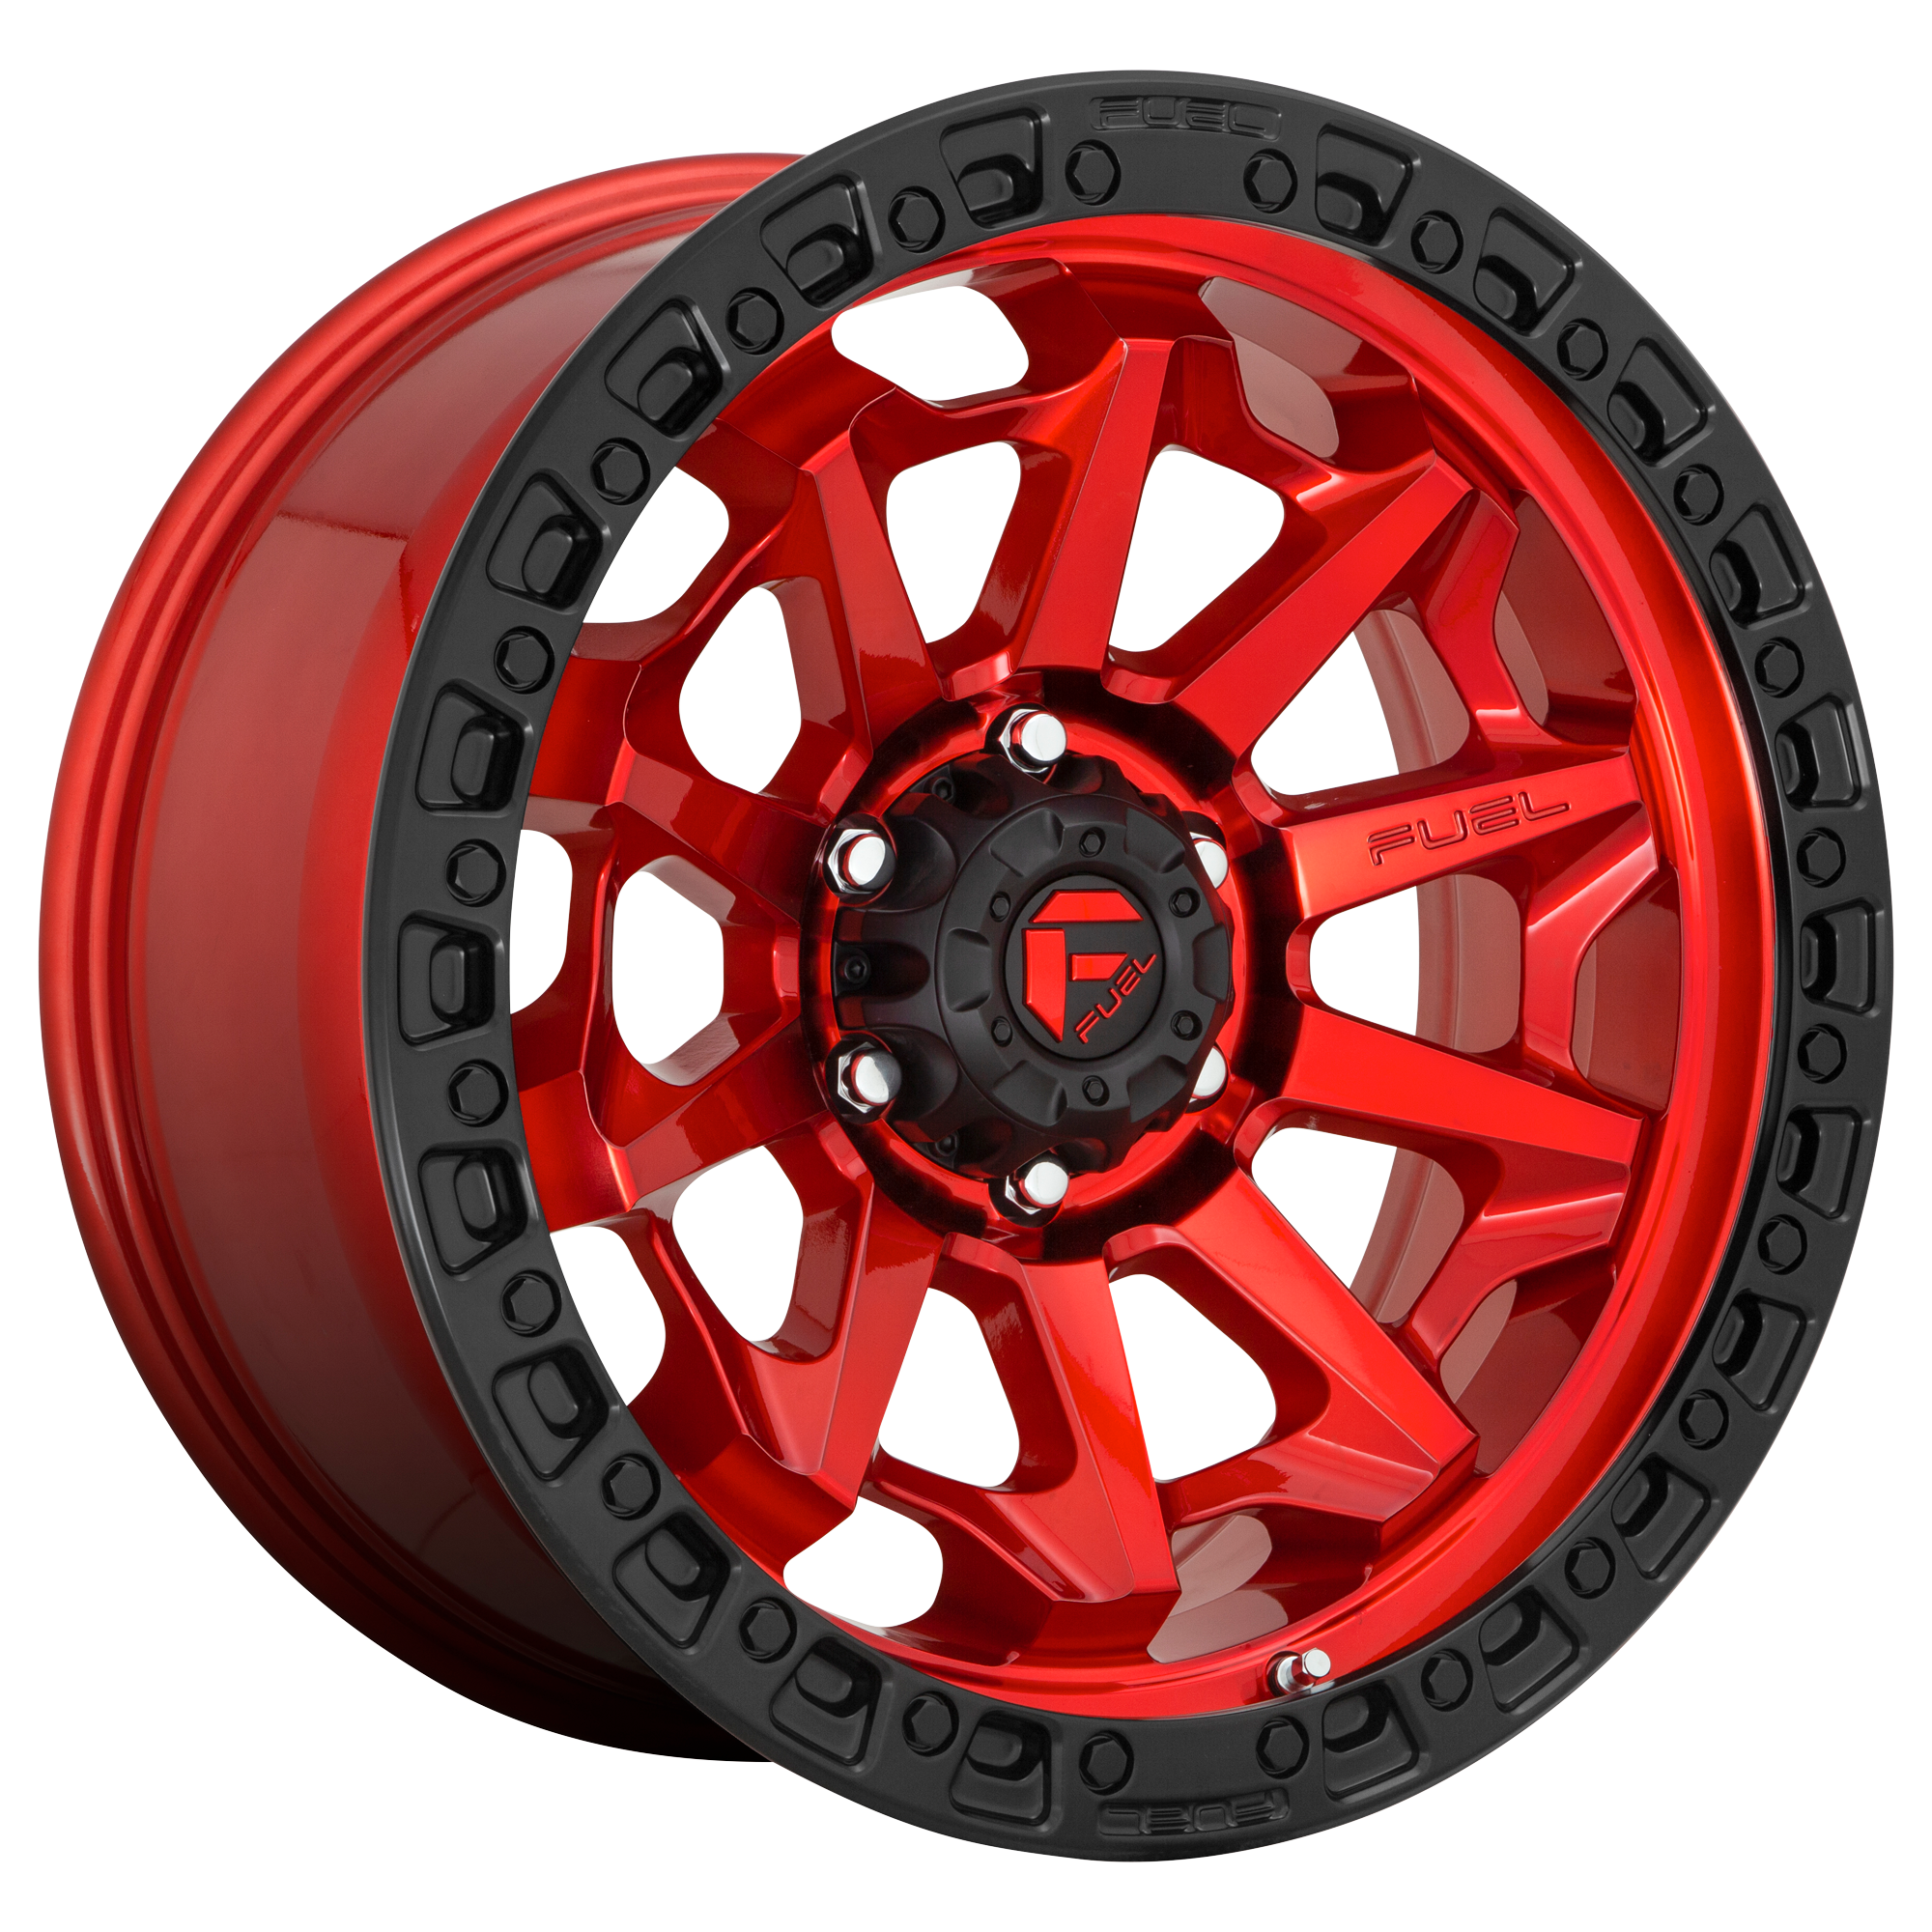 COVERT 20x10 8x170.00 CANDY RED BLACK BEAD RING (-18 mm) - Tires and Engine Performance